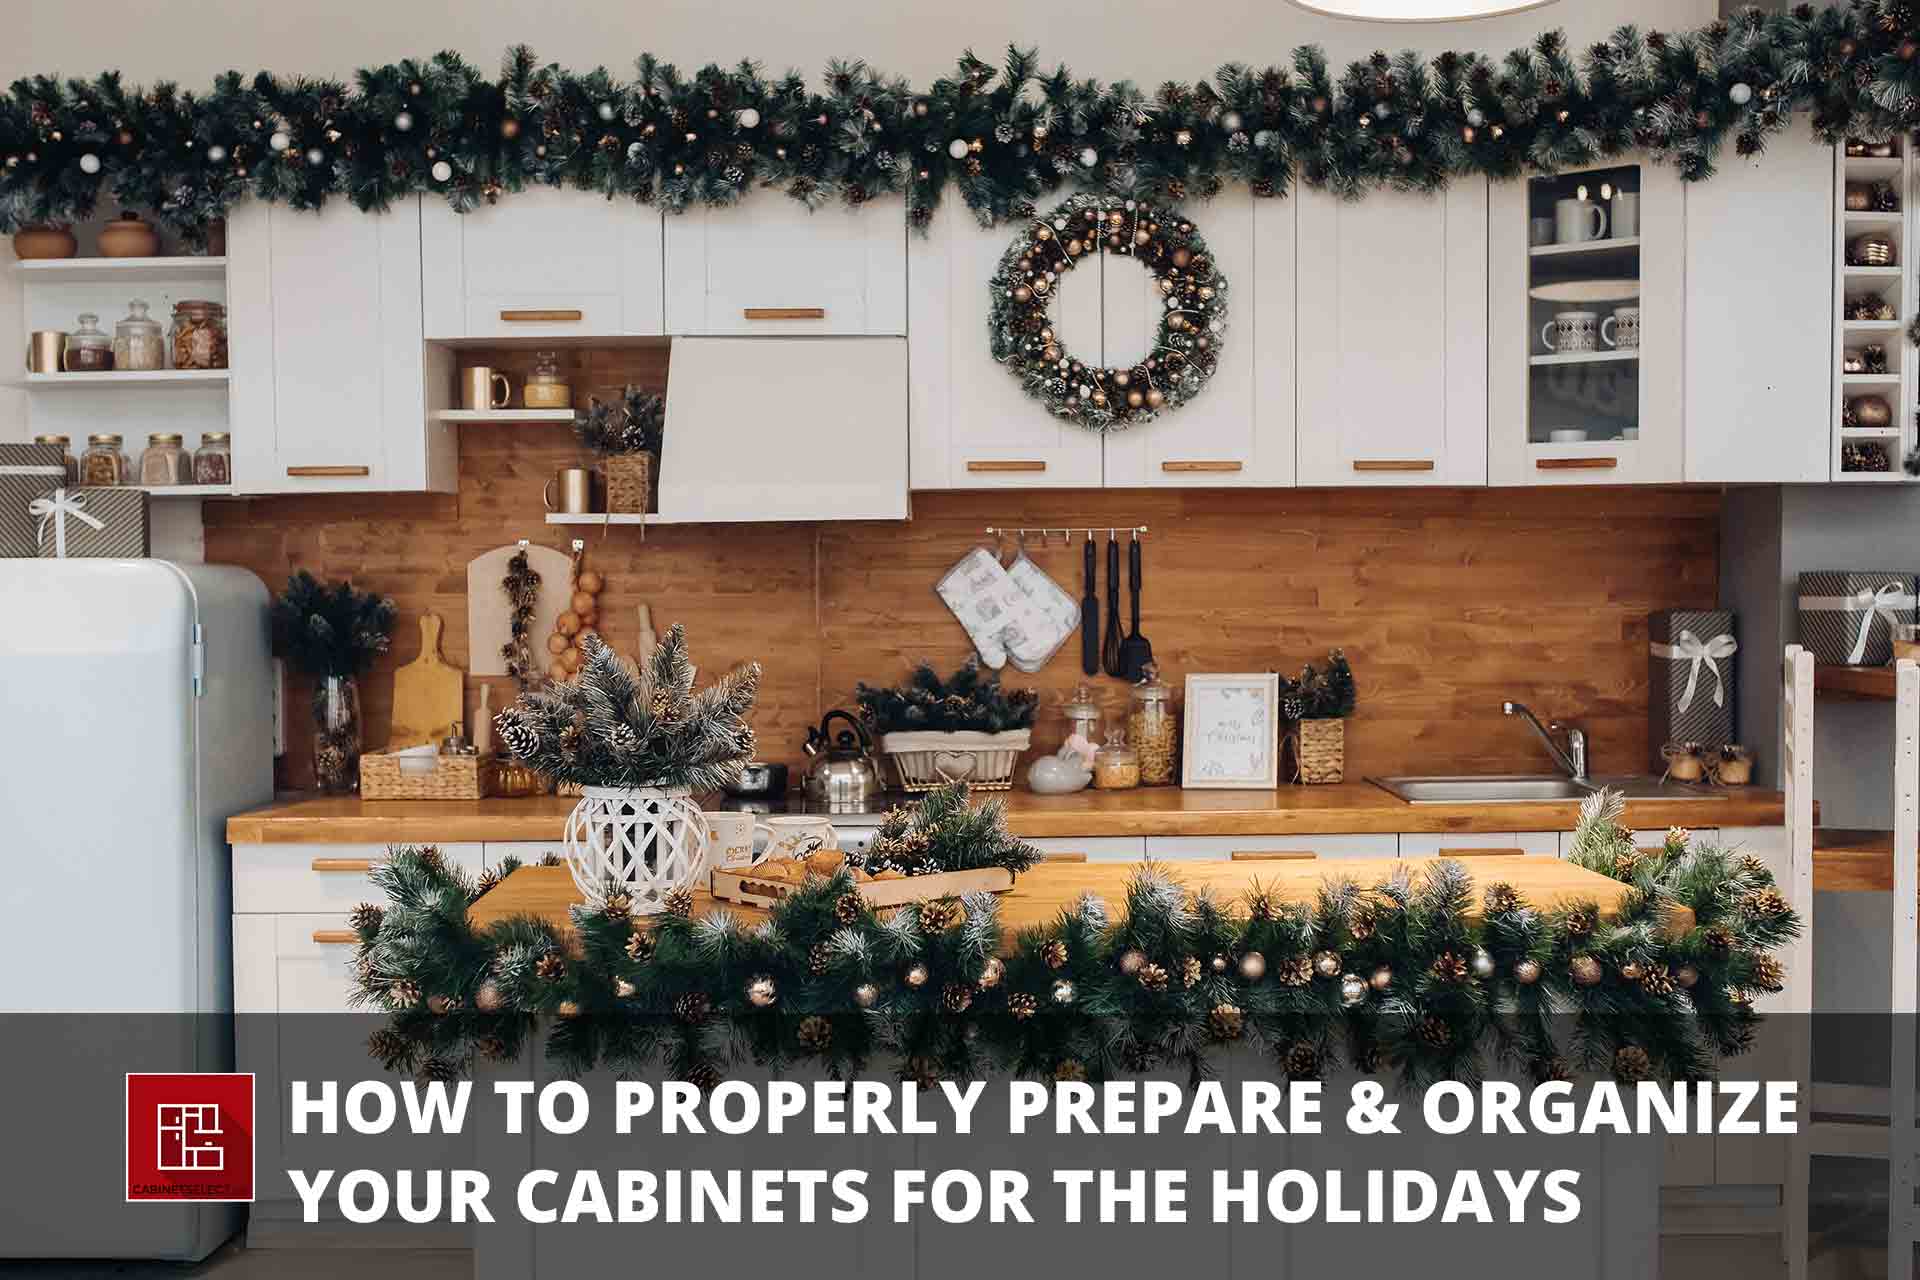 https://cabinetselect.com/cswp/wp-content/uploads/2021/10/How-To-Properly-Prepare-and-Organize-Your-Cabinets-For-The-Holidays-cabinet-select.jpg